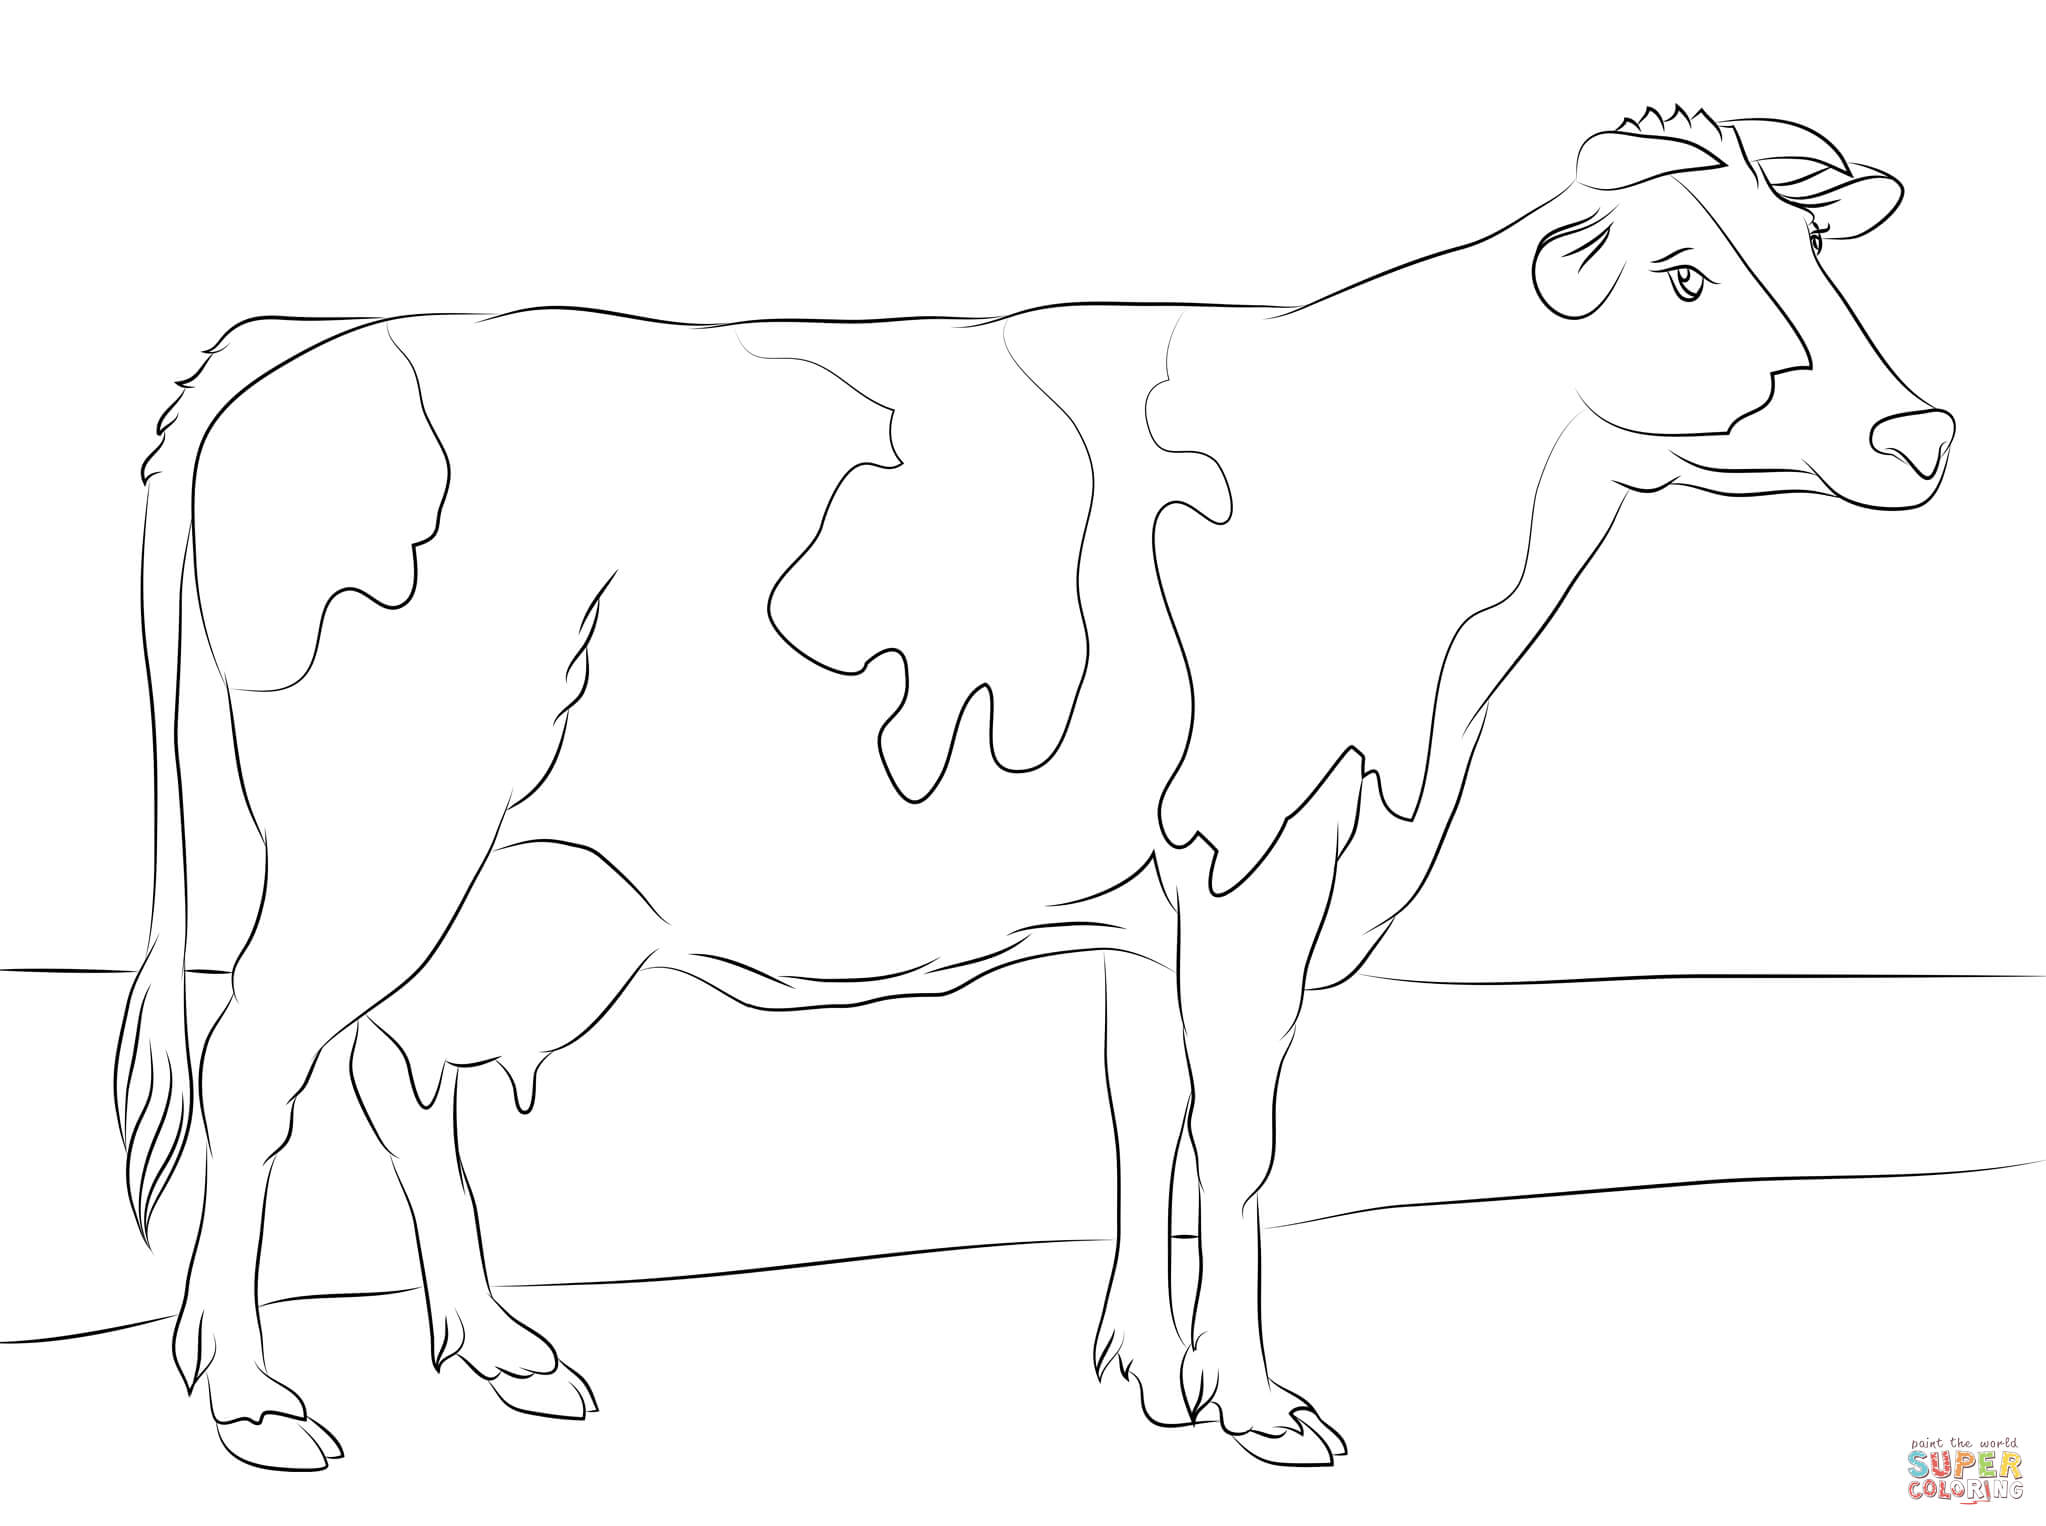 Holstein Cow coloring page | Free Printable Coloring Pages